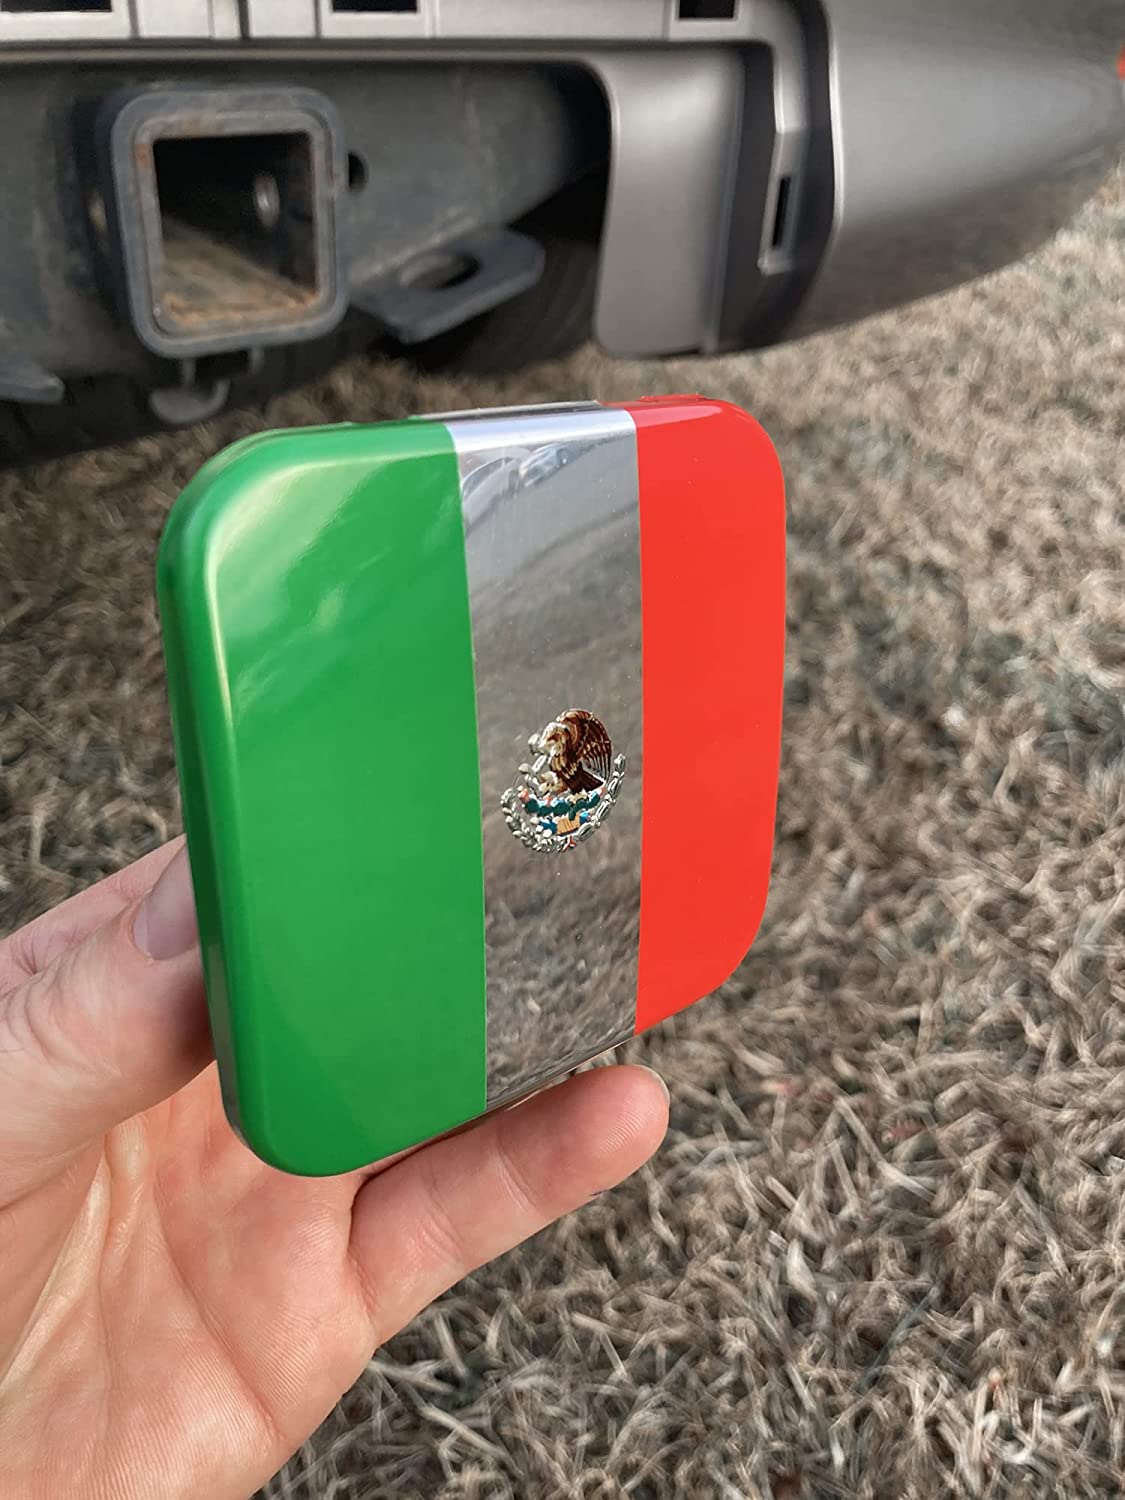 Mexico Flag Hitch Cover Plug (Fits 2" Receivers, Mexican Flag)